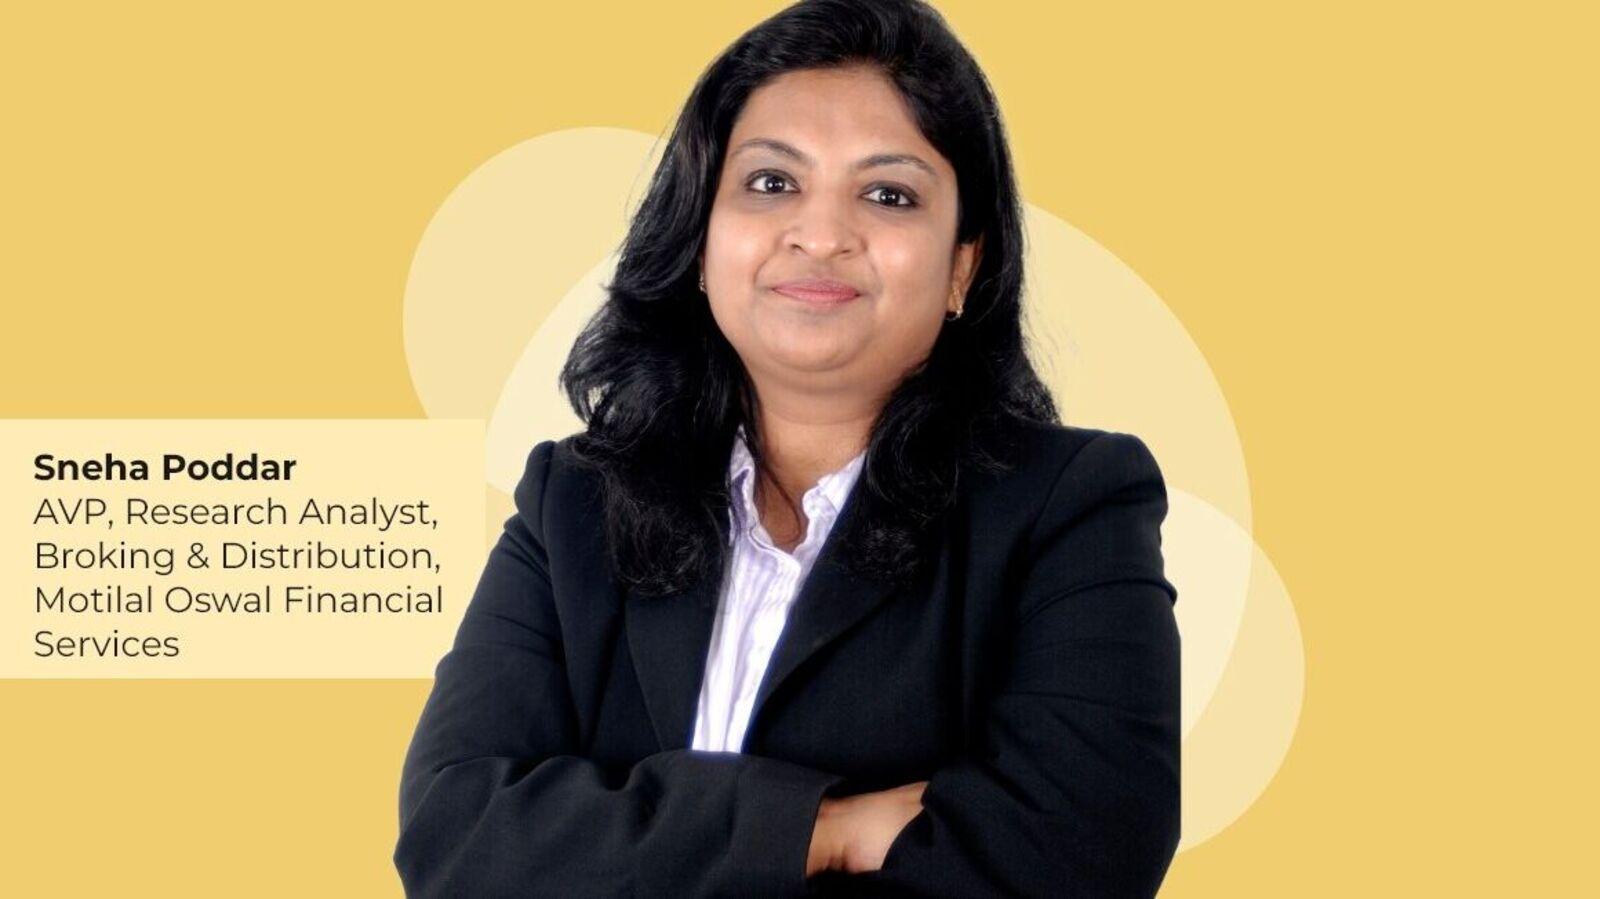 IT growth in near term to be modest, says Sneha Poddar of Motilal Oswal